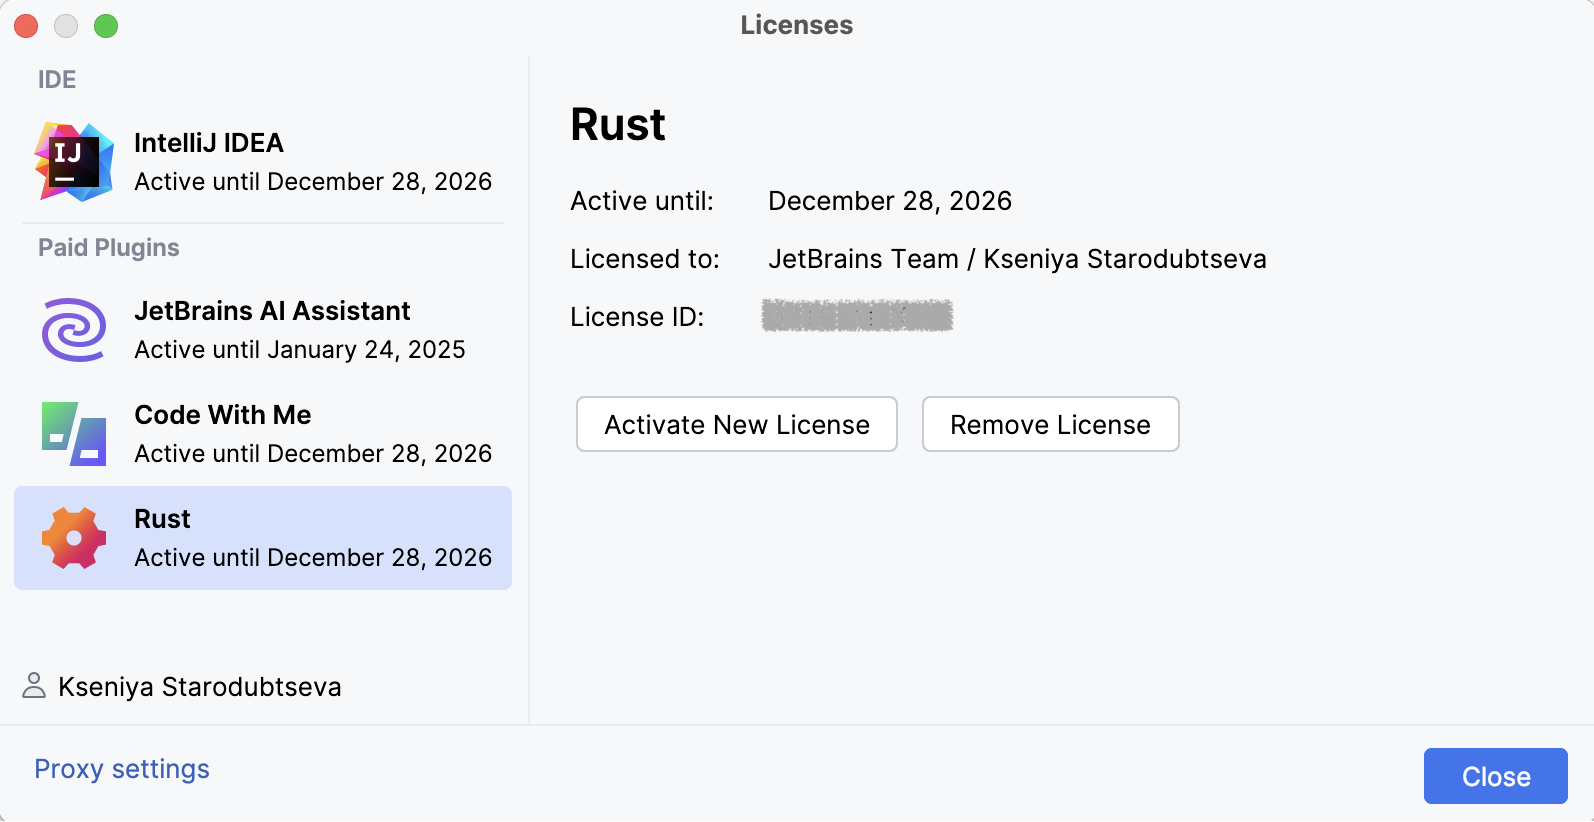 Activating Rust plugin from the Licences dialog